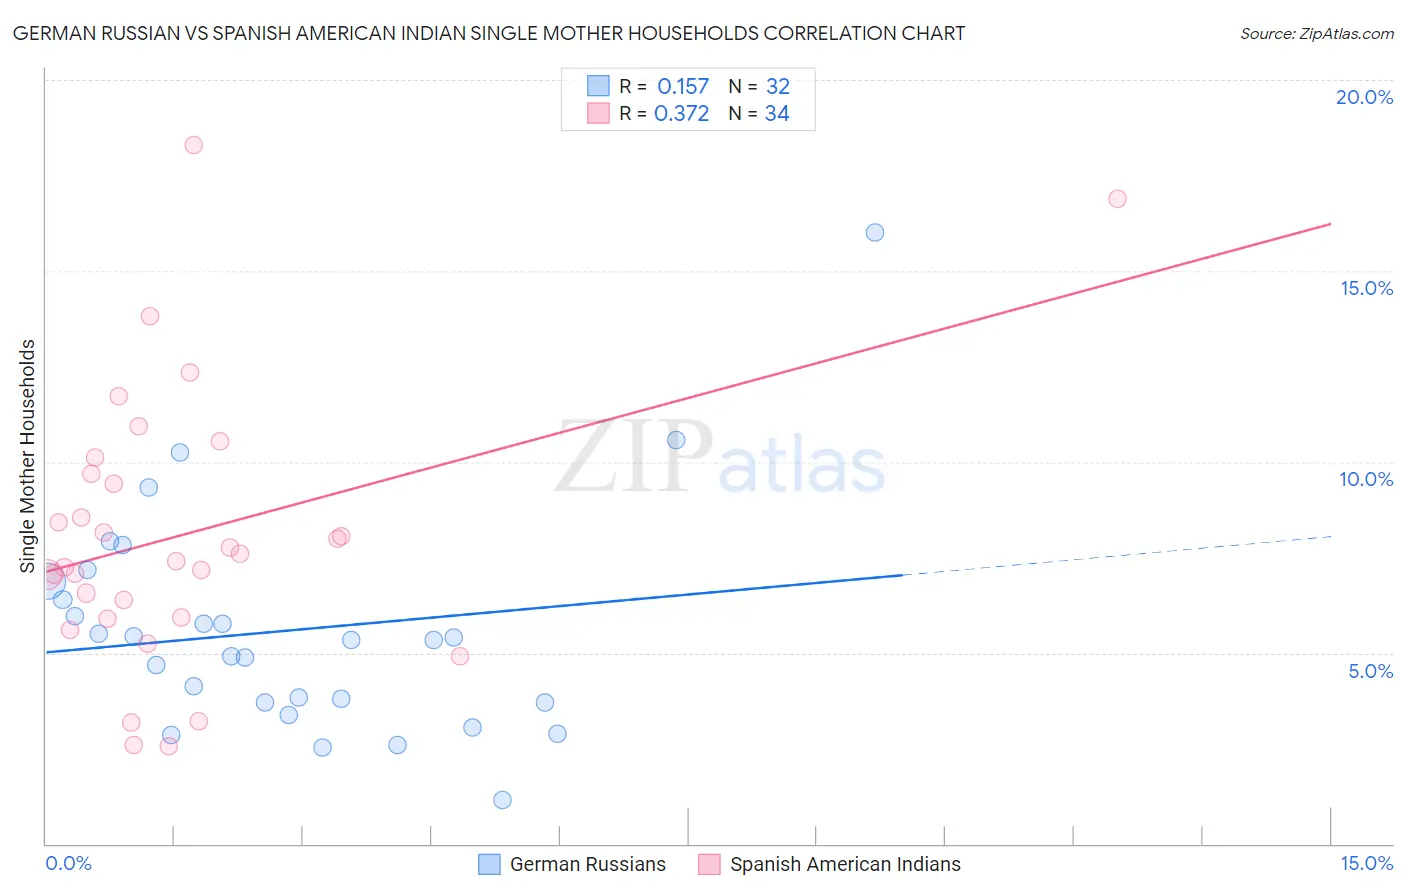 German Russian vs Spanish American Indian Single Mother Households